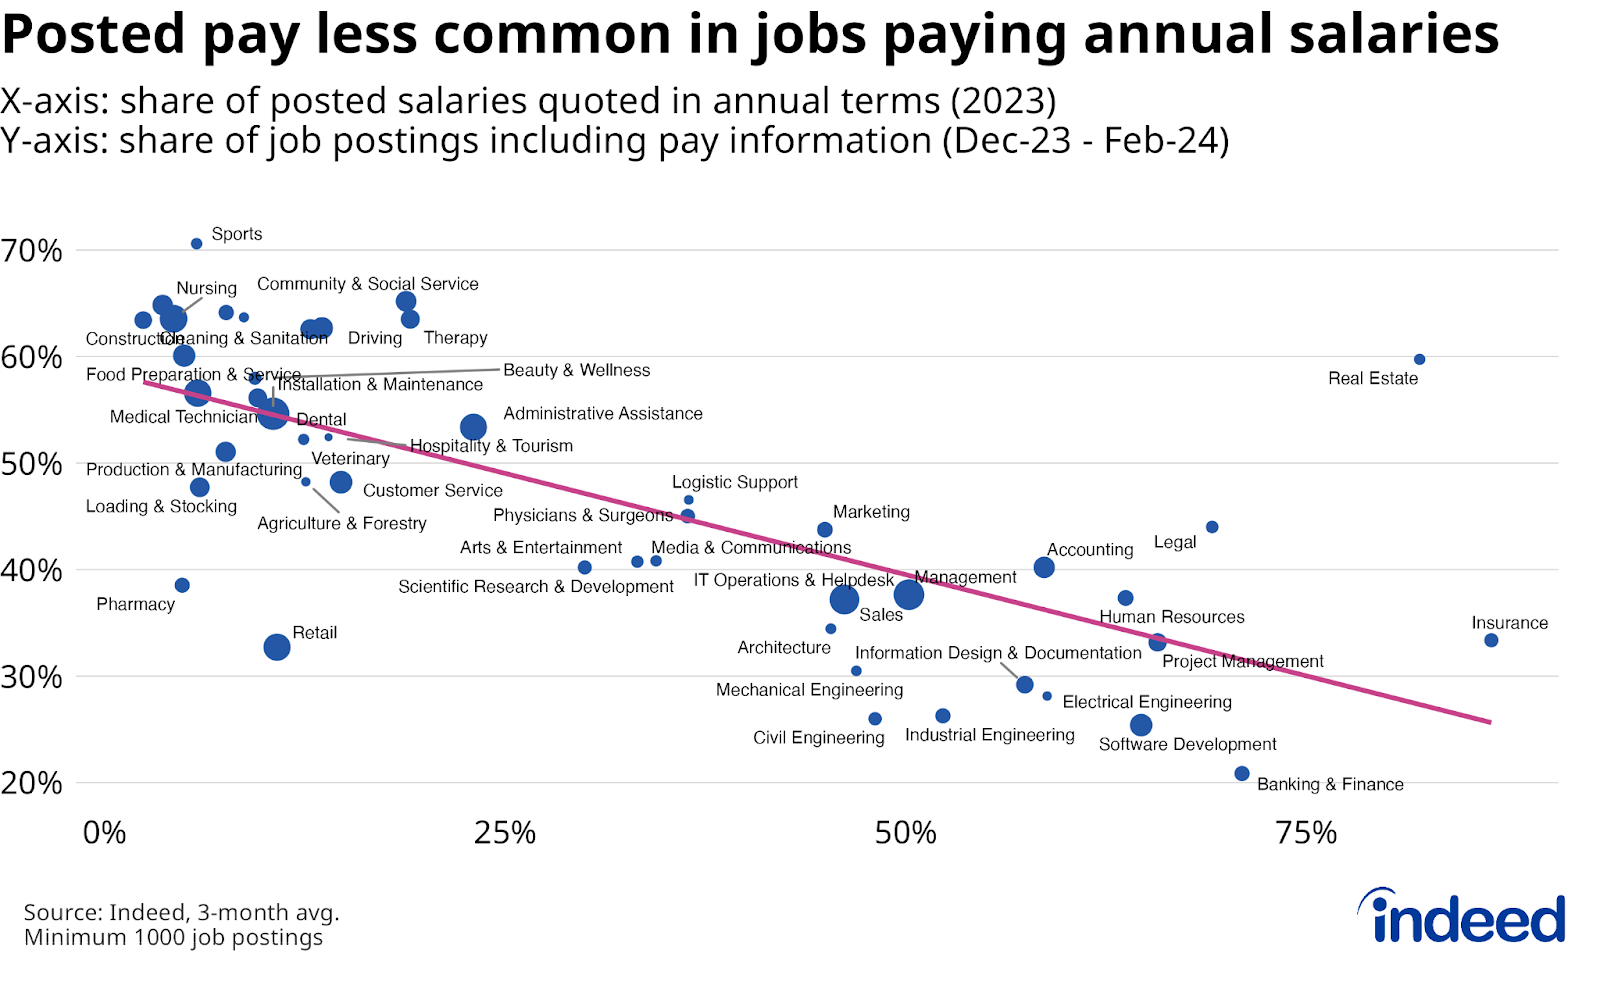 Scatterplot titled “Posted pay less common in jobs paying annual salaries,” with the x-axis representing the share of posted salaries in 2023 that were in annual terms by occupation, and the y-axis representing the share of postings including any salary information in February 2024. There is a strong negative correlation between the two variables.